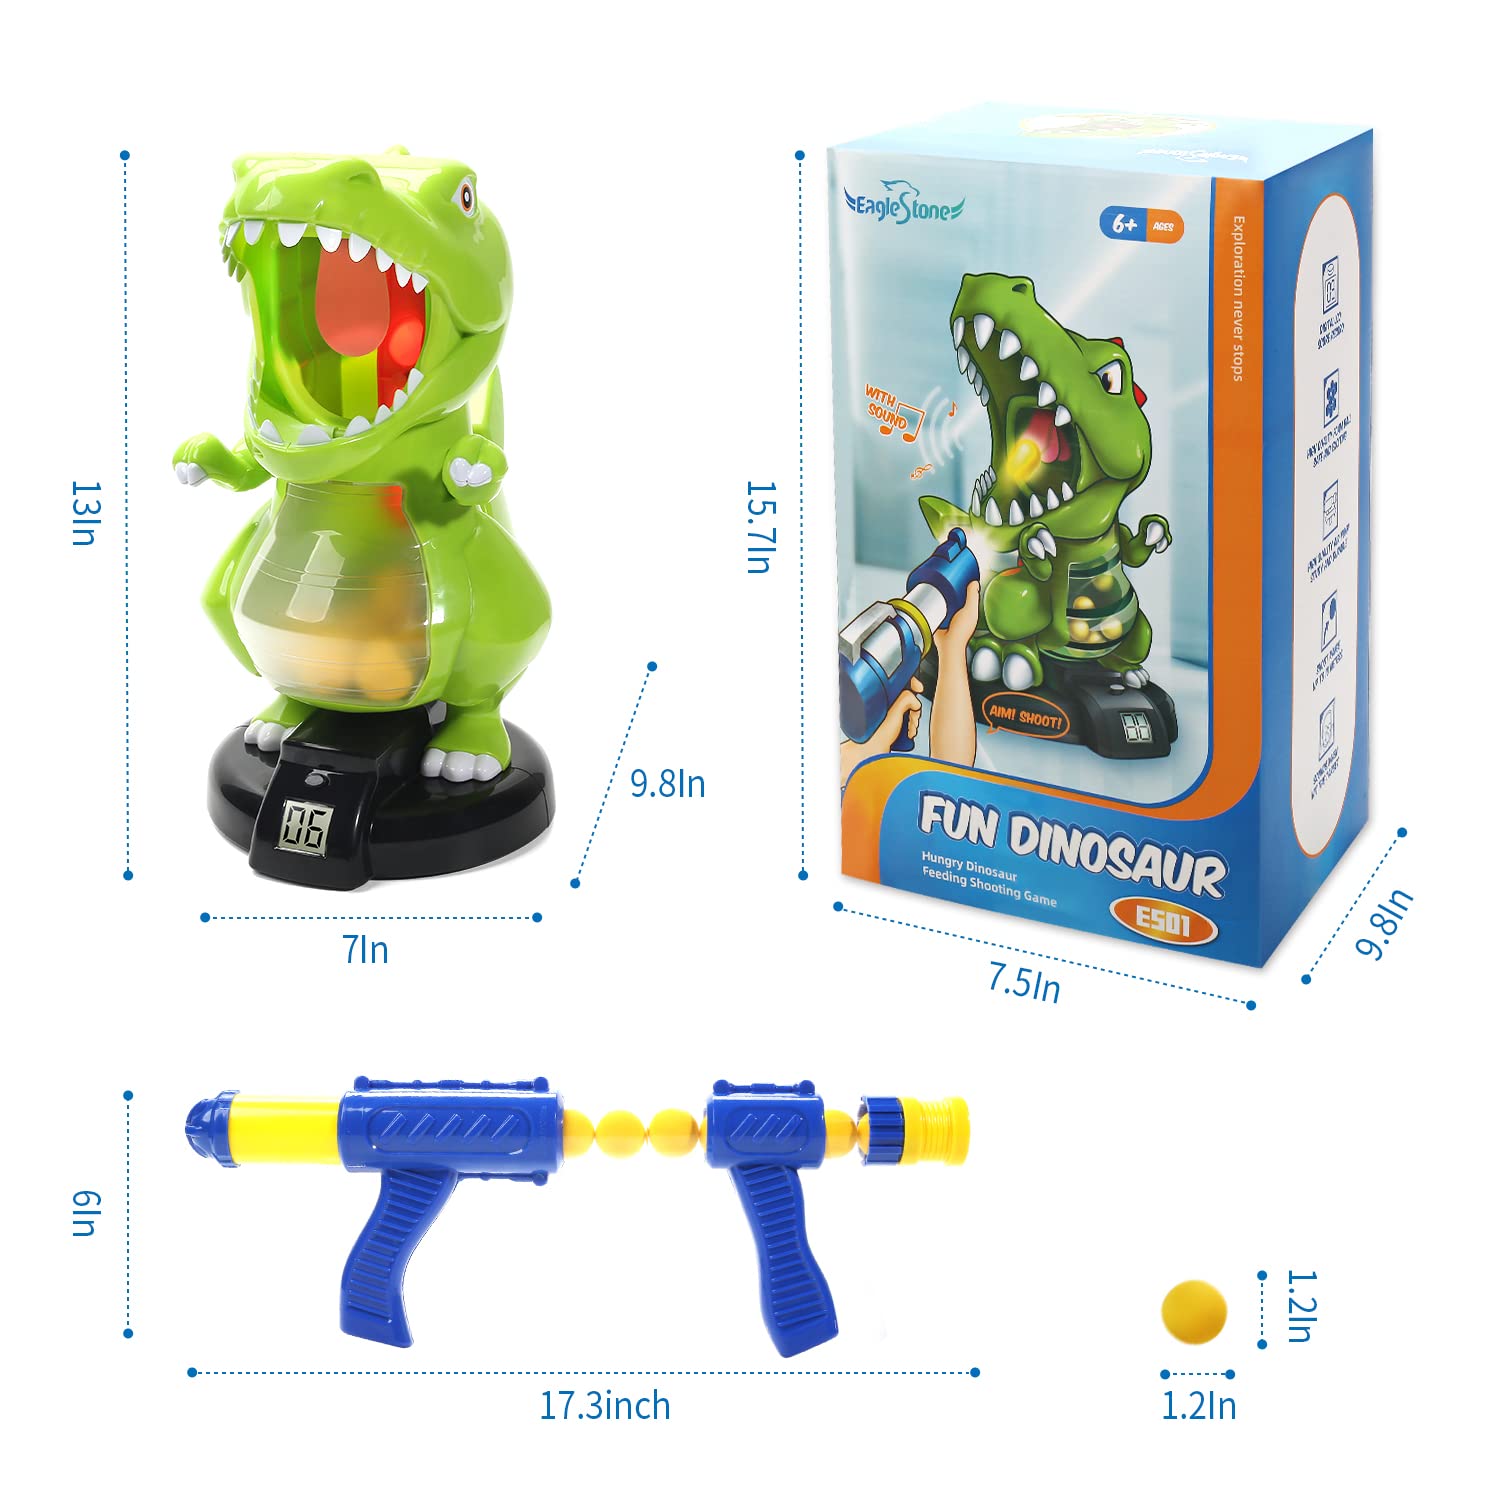  Dinosaur Toys Shooting Games for Kids Shooting Toys Target  Practice with LCD Score Record and 24 Foam Balls,Air Balls Shooting Foam  Ball Game for Boys Girls and Adult Ideal Gifts Toys